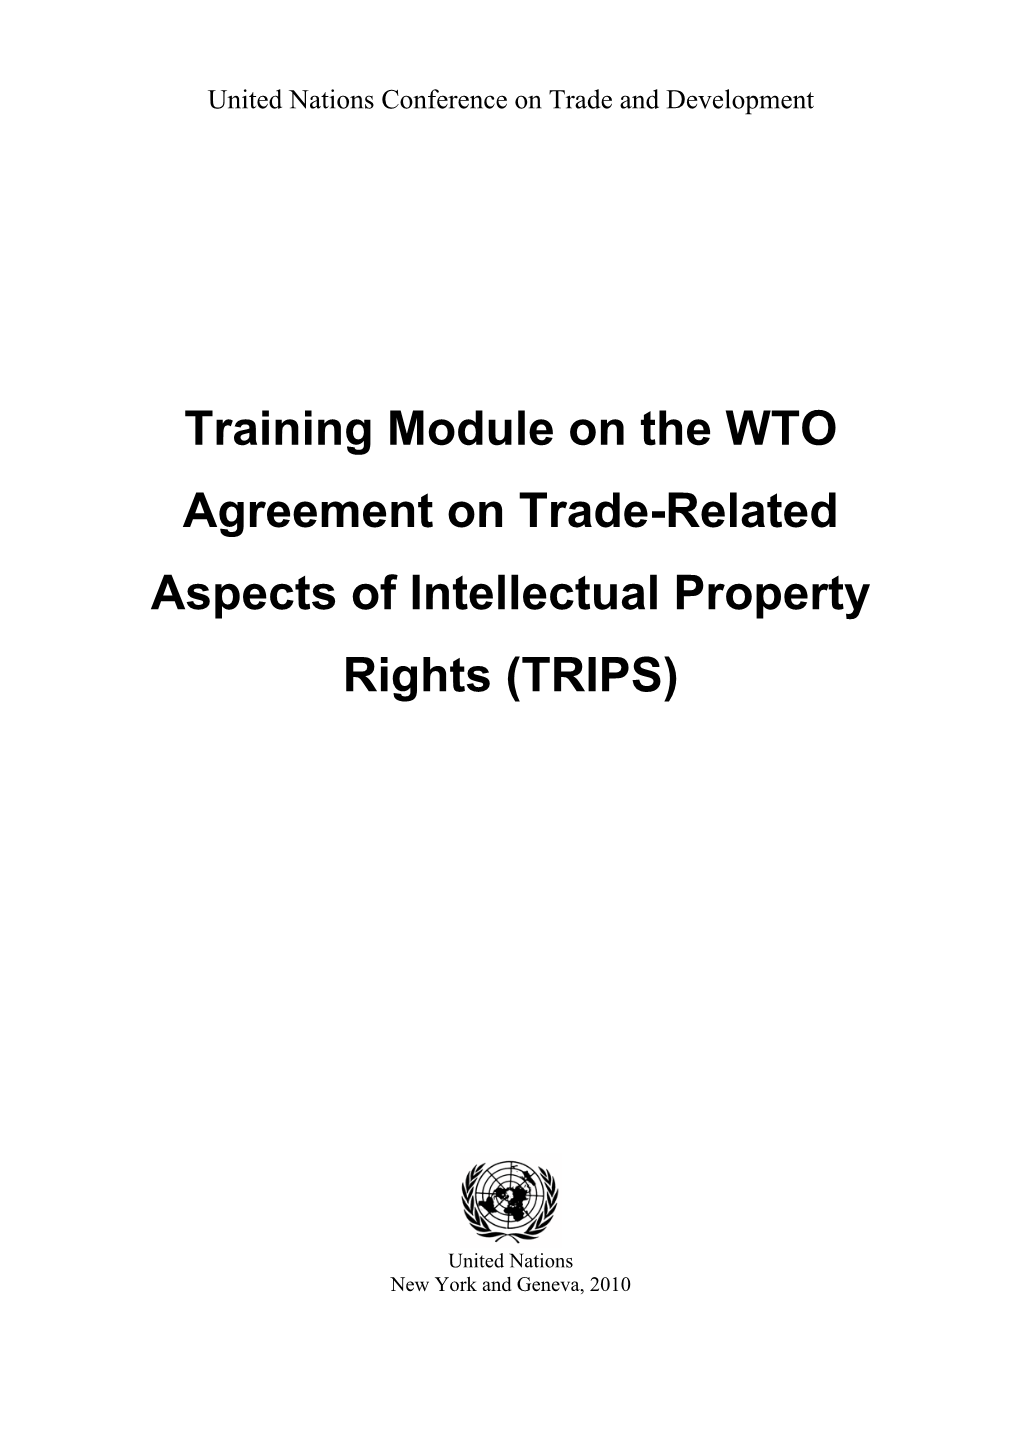 Training Module on the WTO Agreement on Trade-Related Aspects of Intellectual Property Rights (TRIPS)